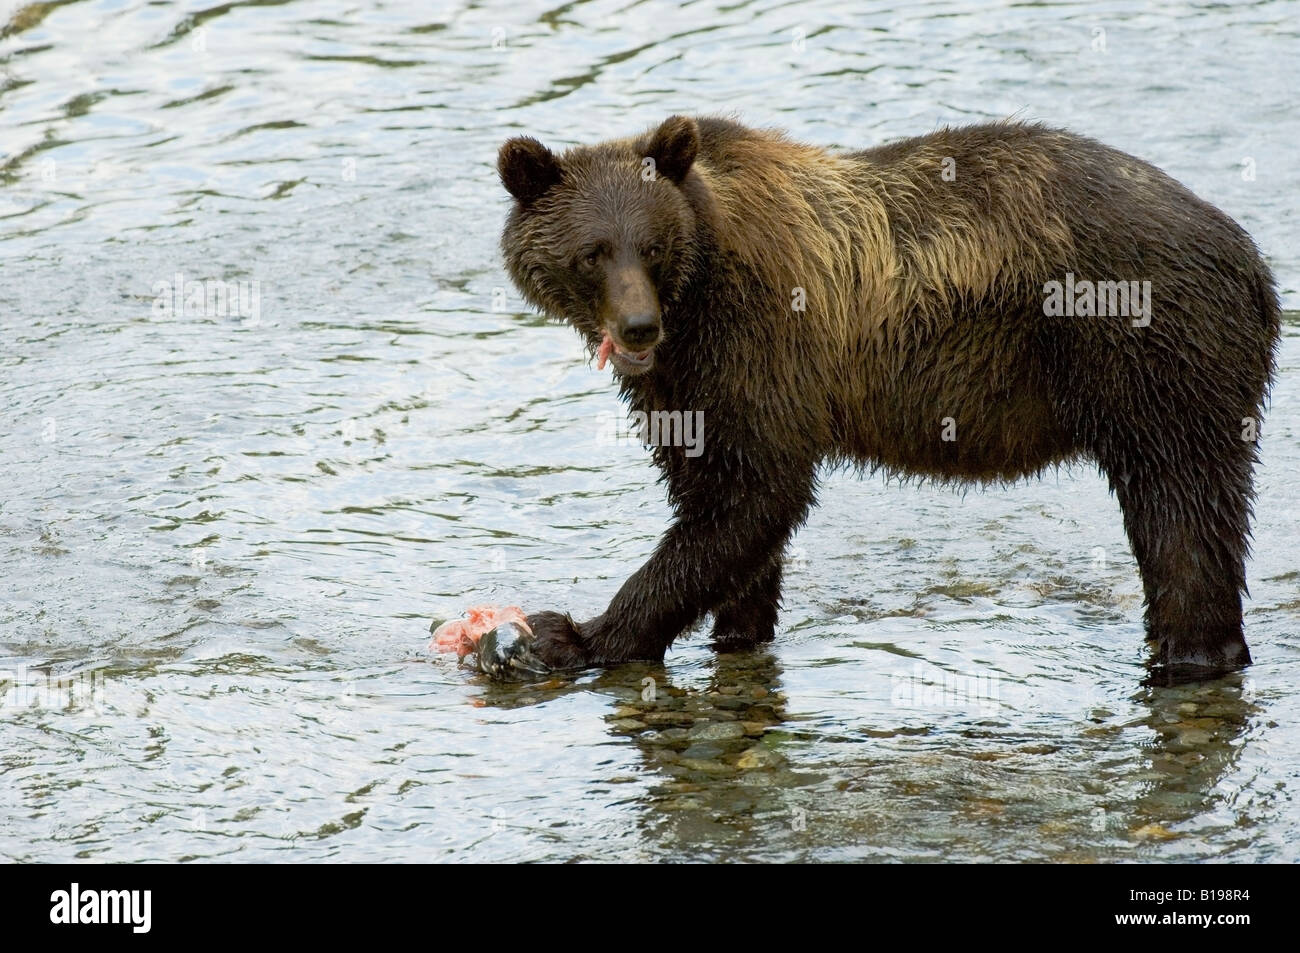 Grizzly Bear (Ursus arctos) Adult eating salmon. Fish Creek Tongass National Forest, Alaska, United States of America. Stock Photo